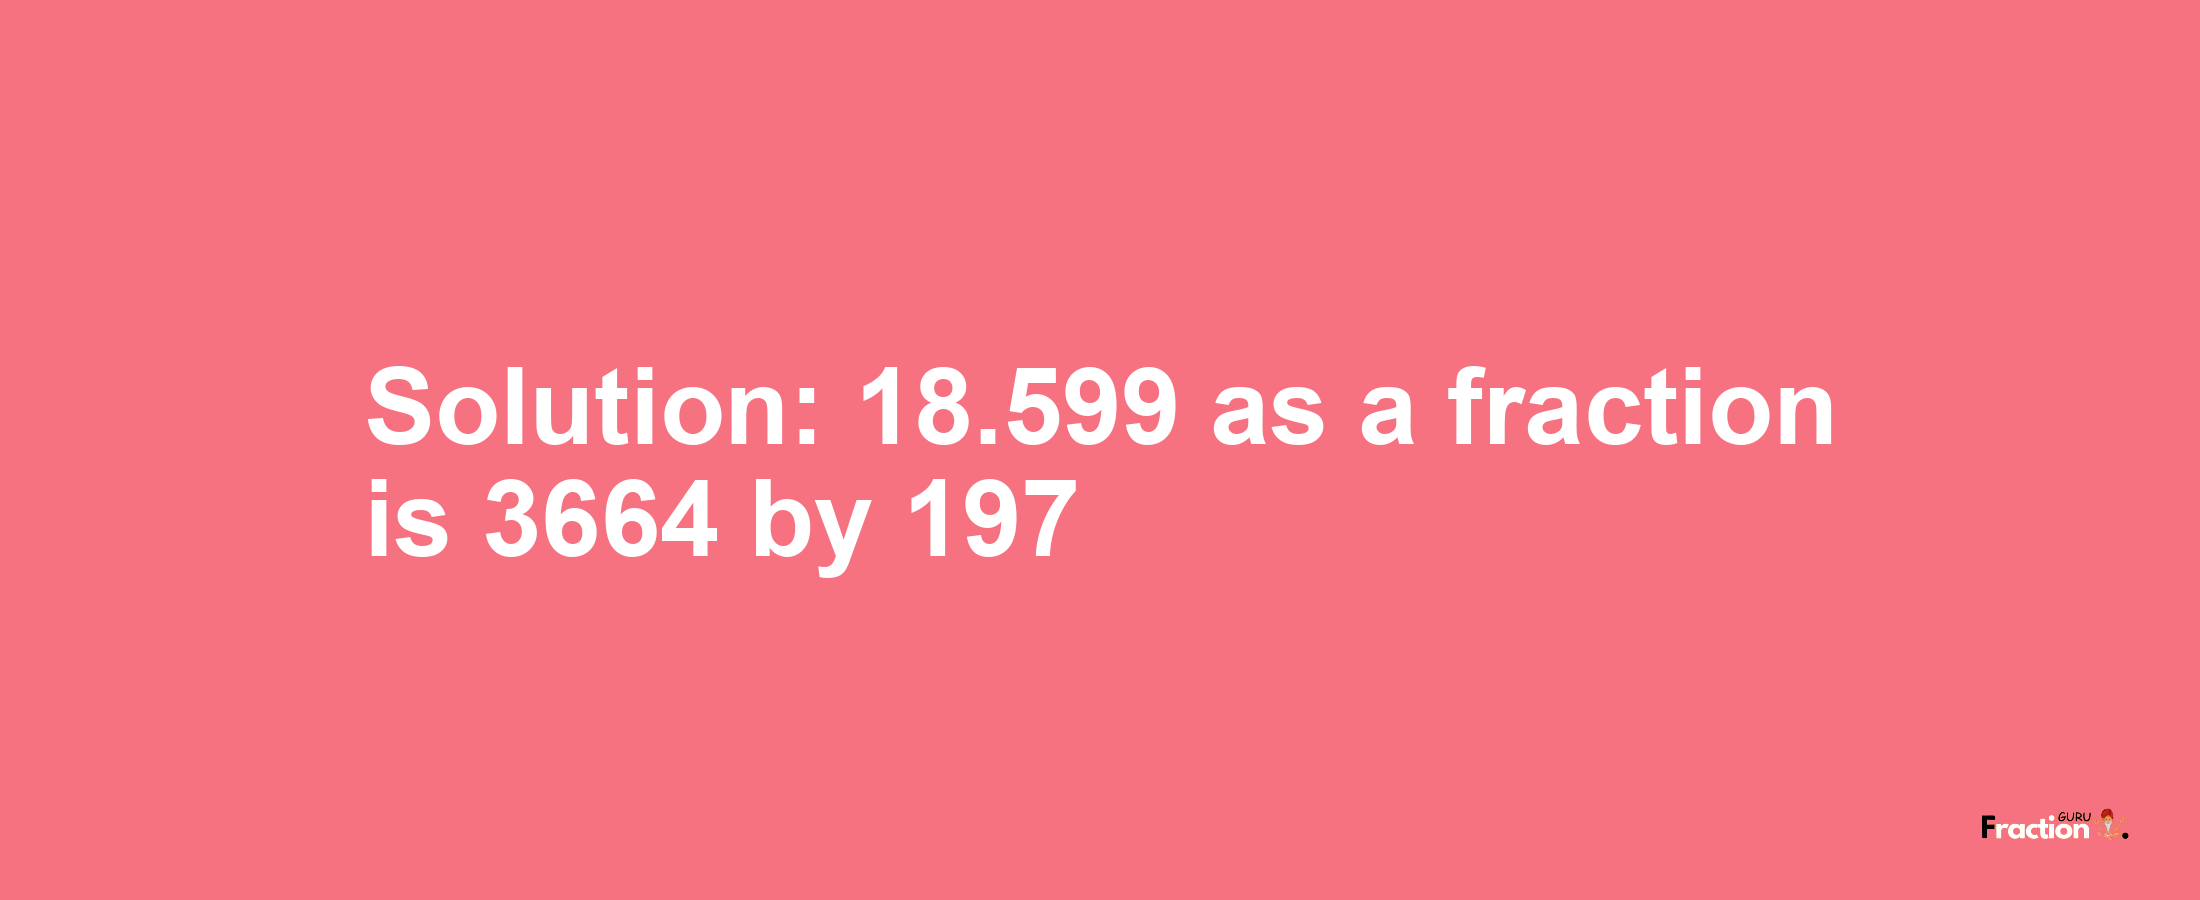 Solution:18.599 as a fraction is 3664/197